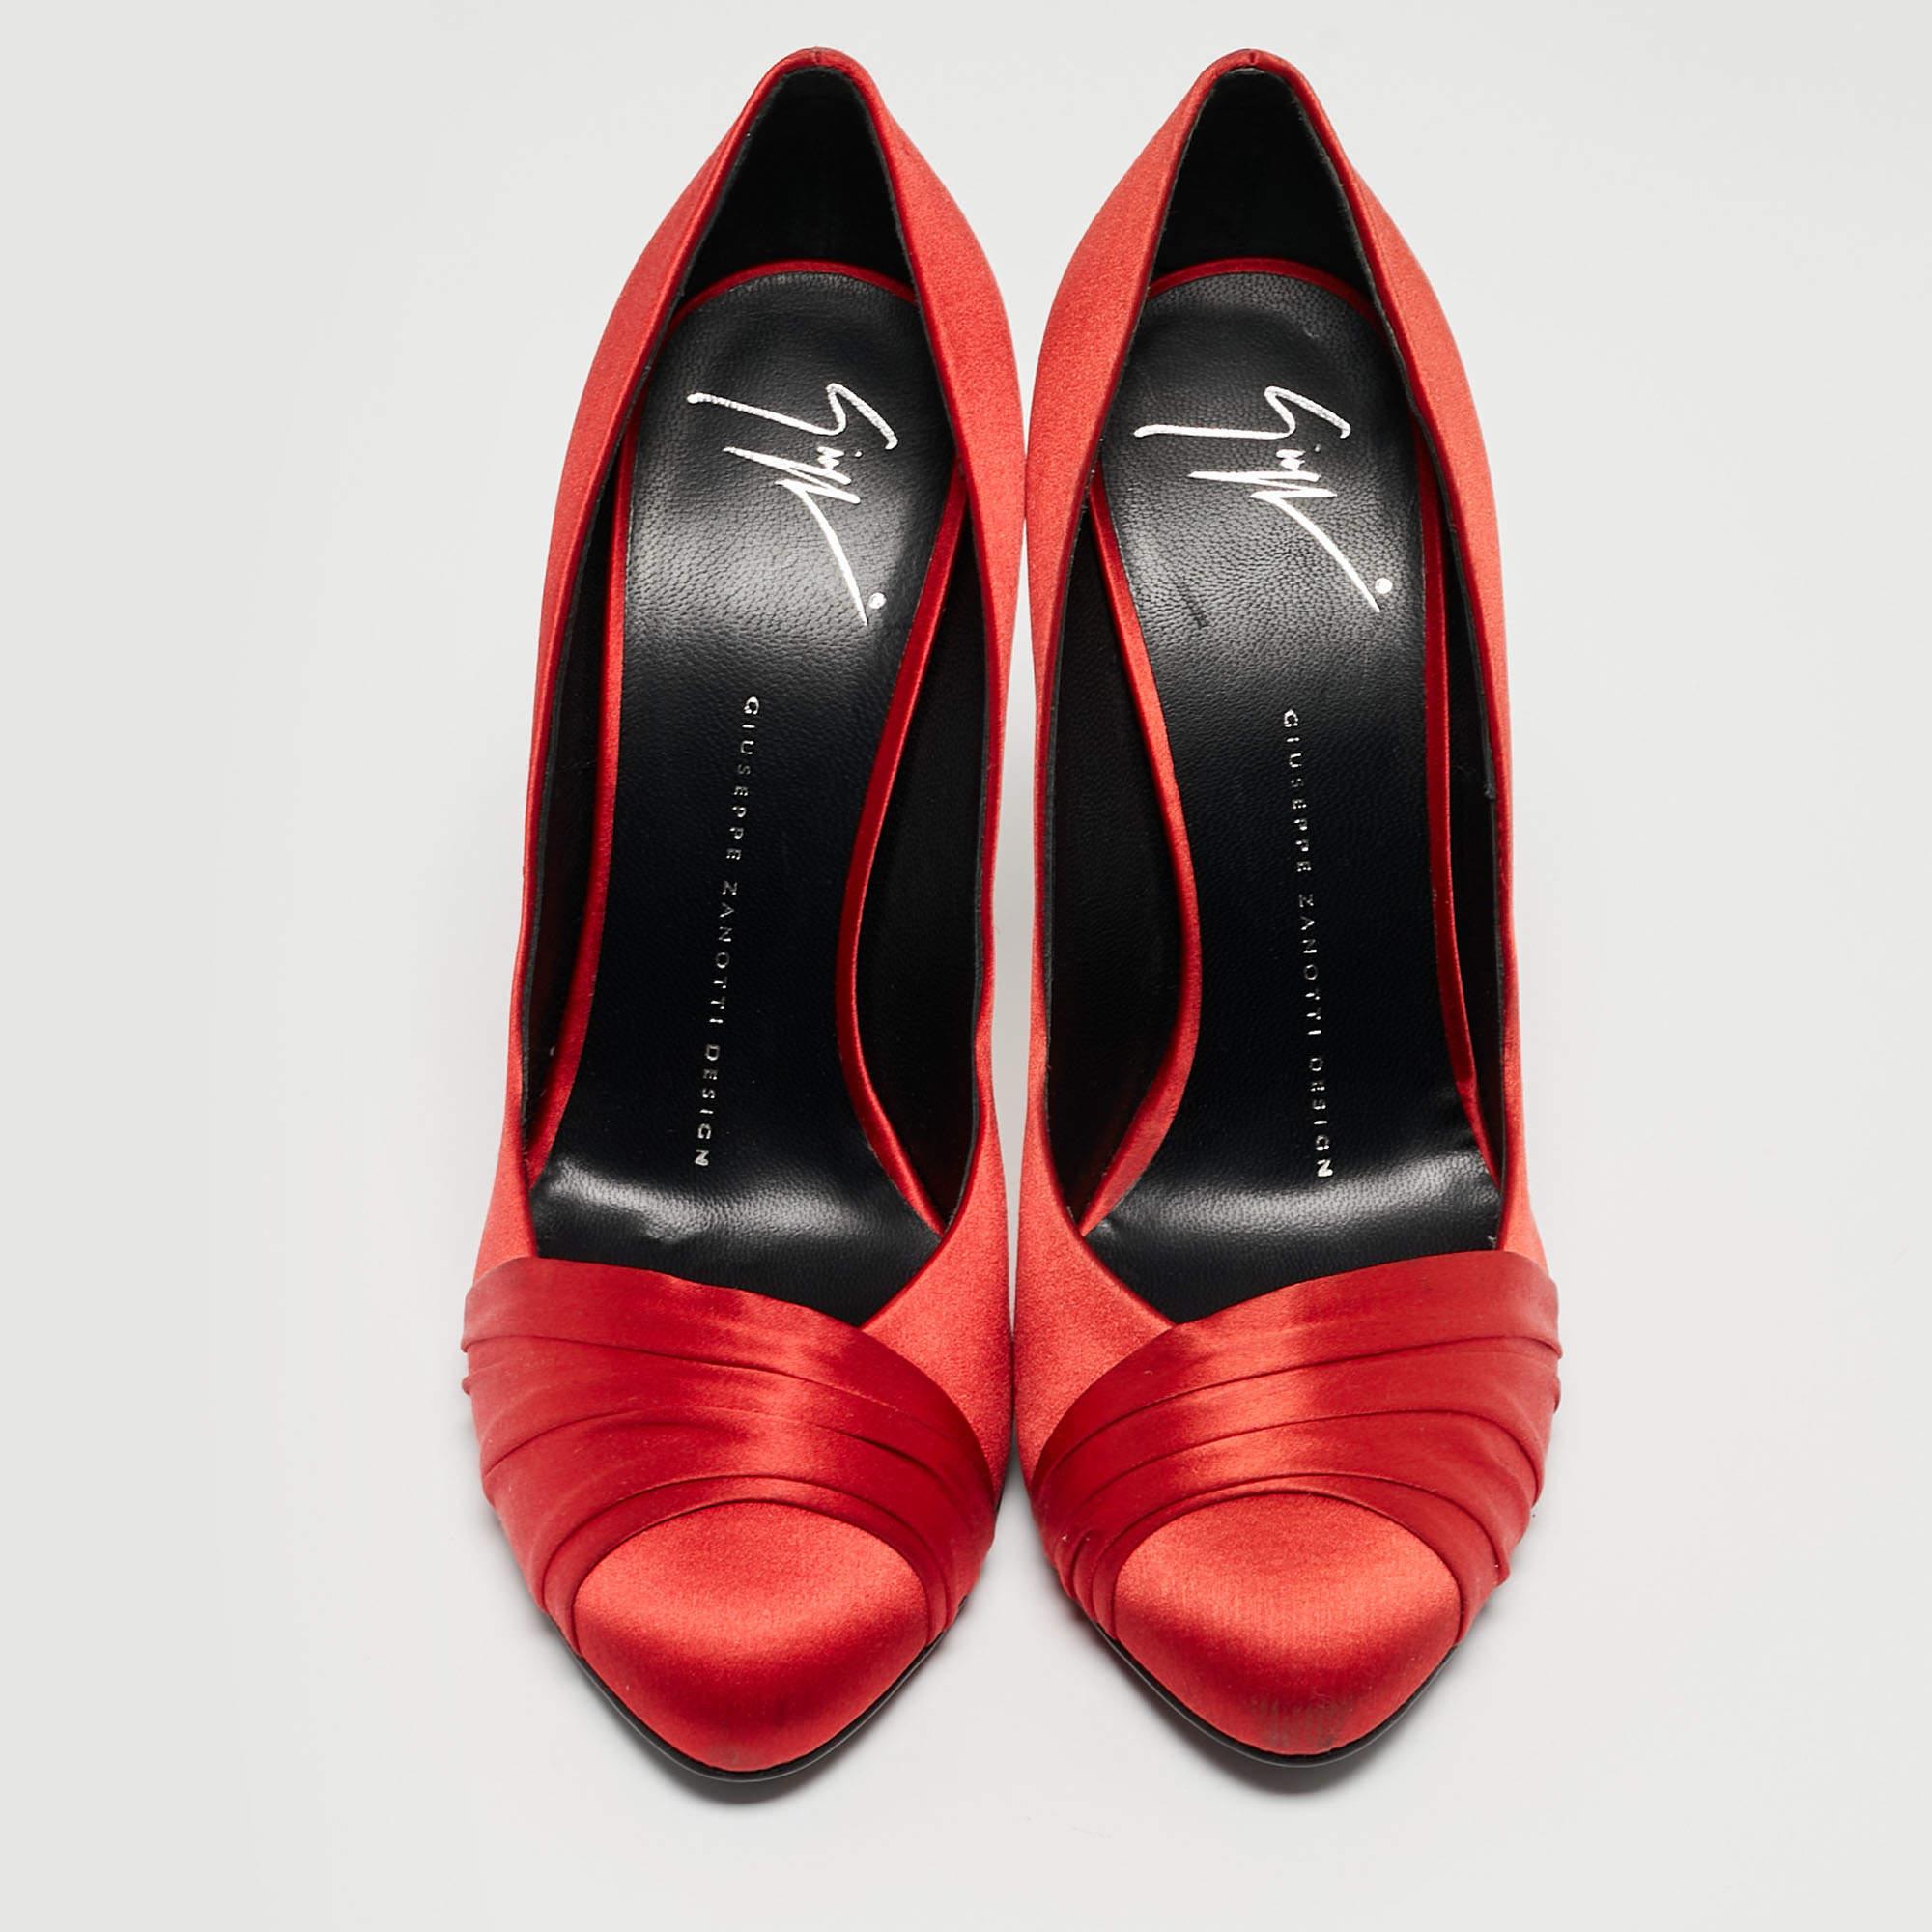 Make a statement with these Giuseppe Zanotti red pumps for women. Impeccably crafted, these chic heels offer both fashion and comfort, elevating your look with each graceful step.

Includes: Original Box